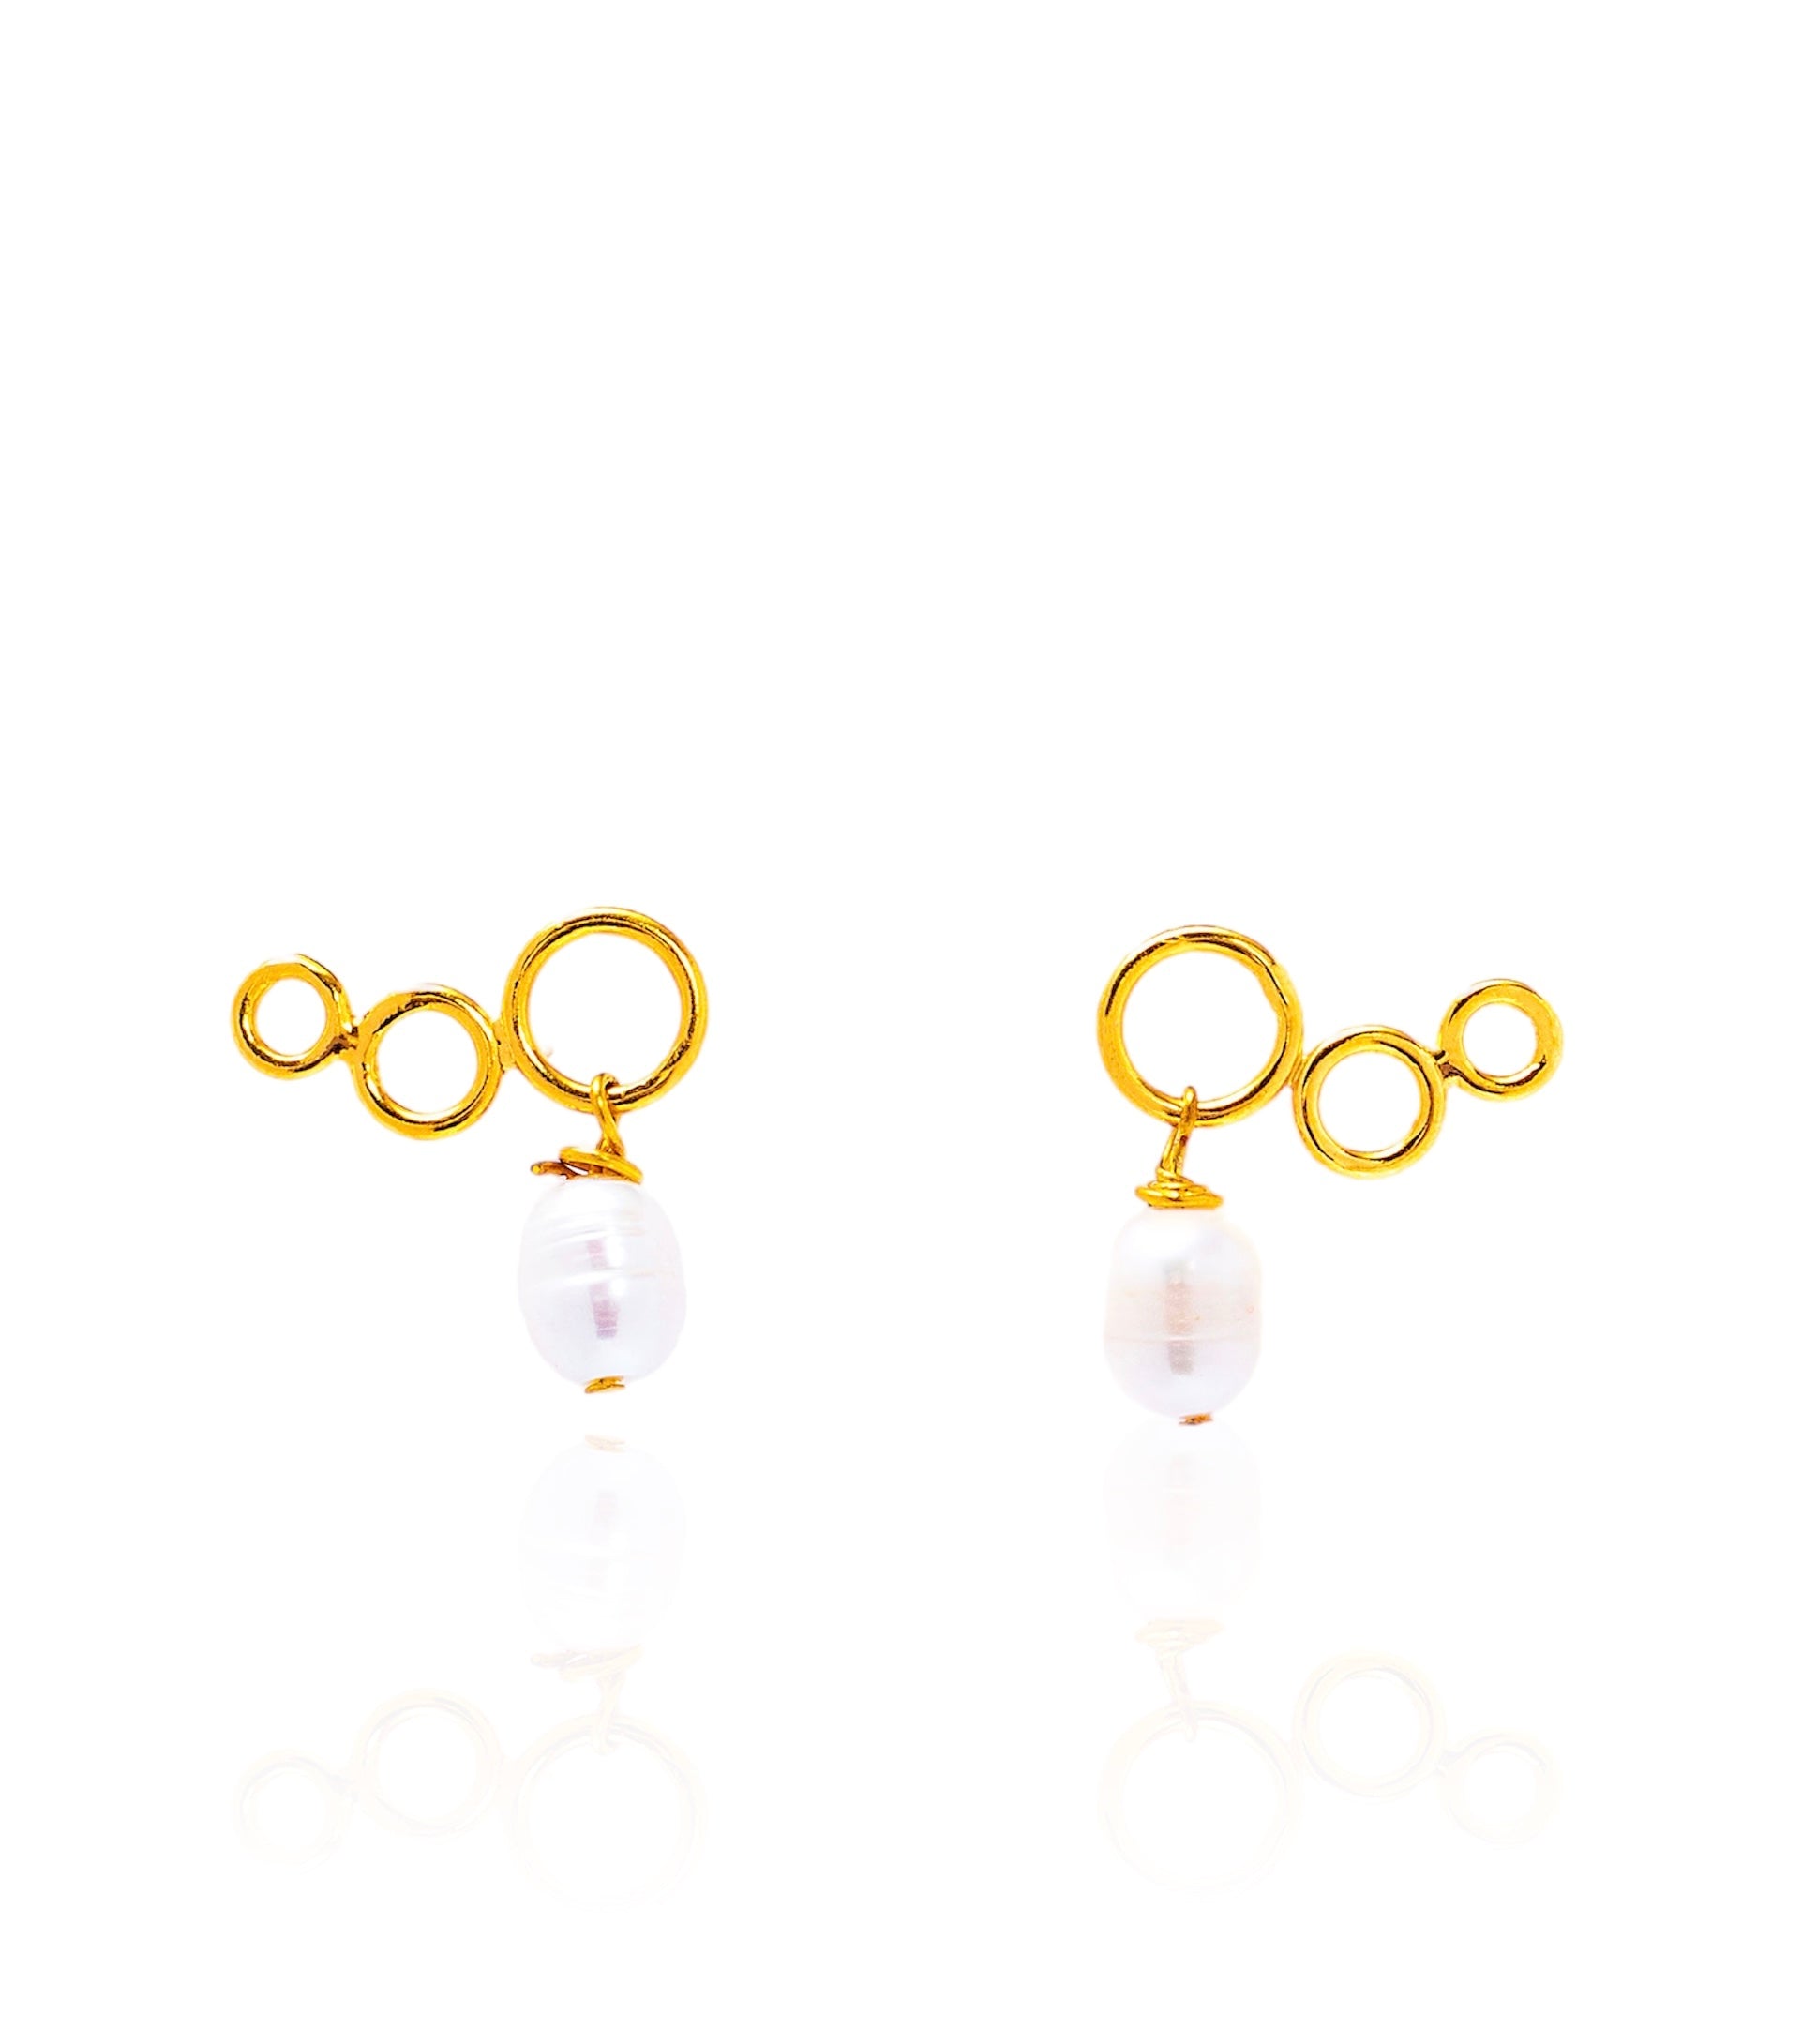 gold ear crawlers with white pearls